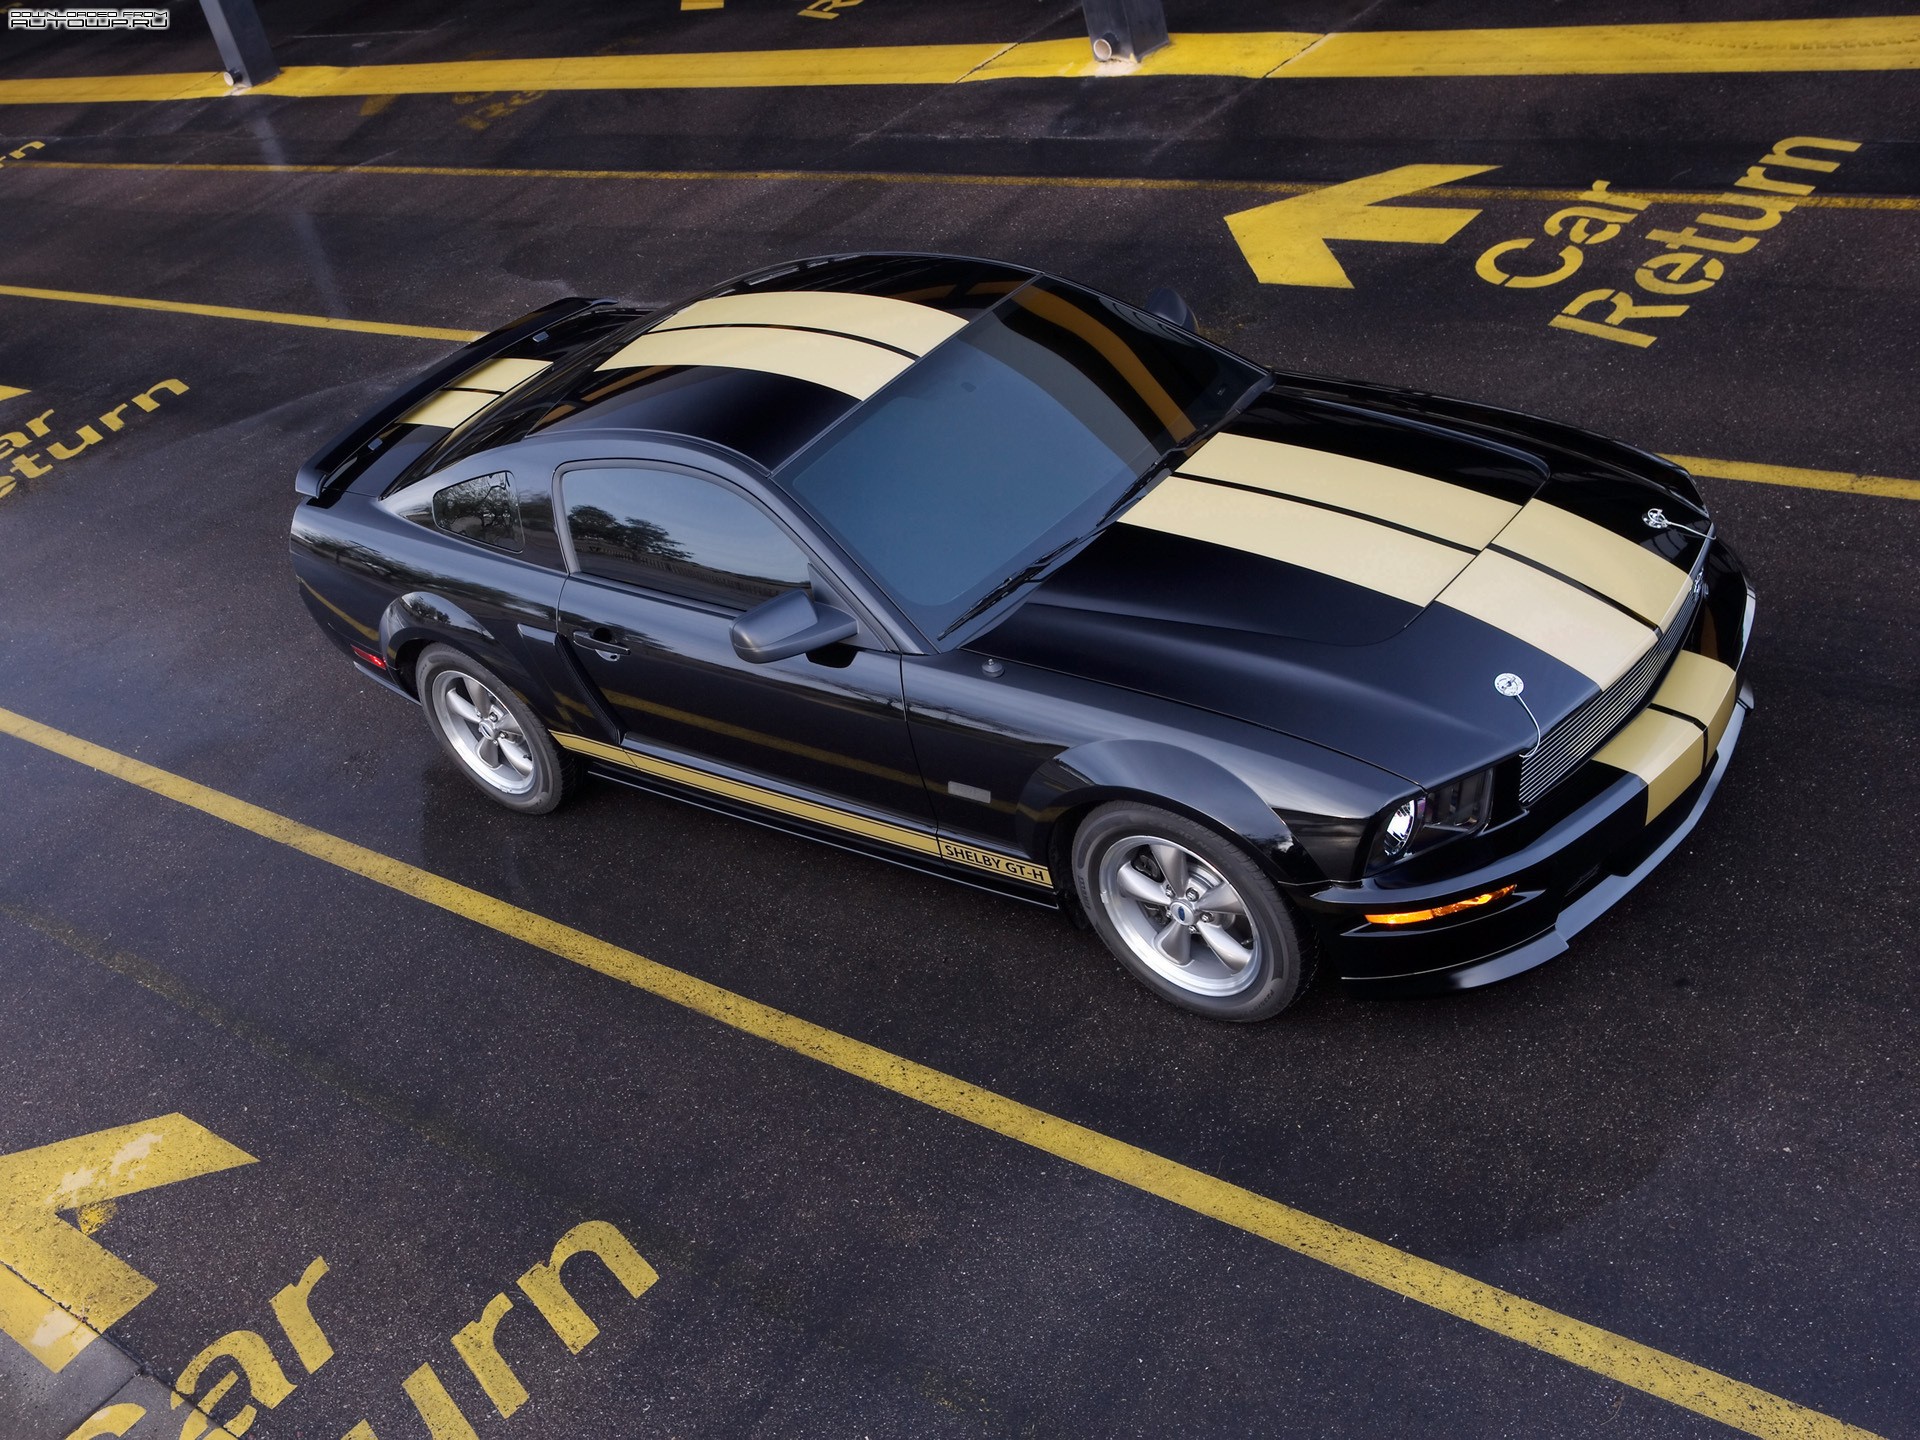 General 1920x1440 car vehicle black cars Ford Mustang Shelby Ford Ford Mustang racing stripes road asphalt Ford Mustang S-197